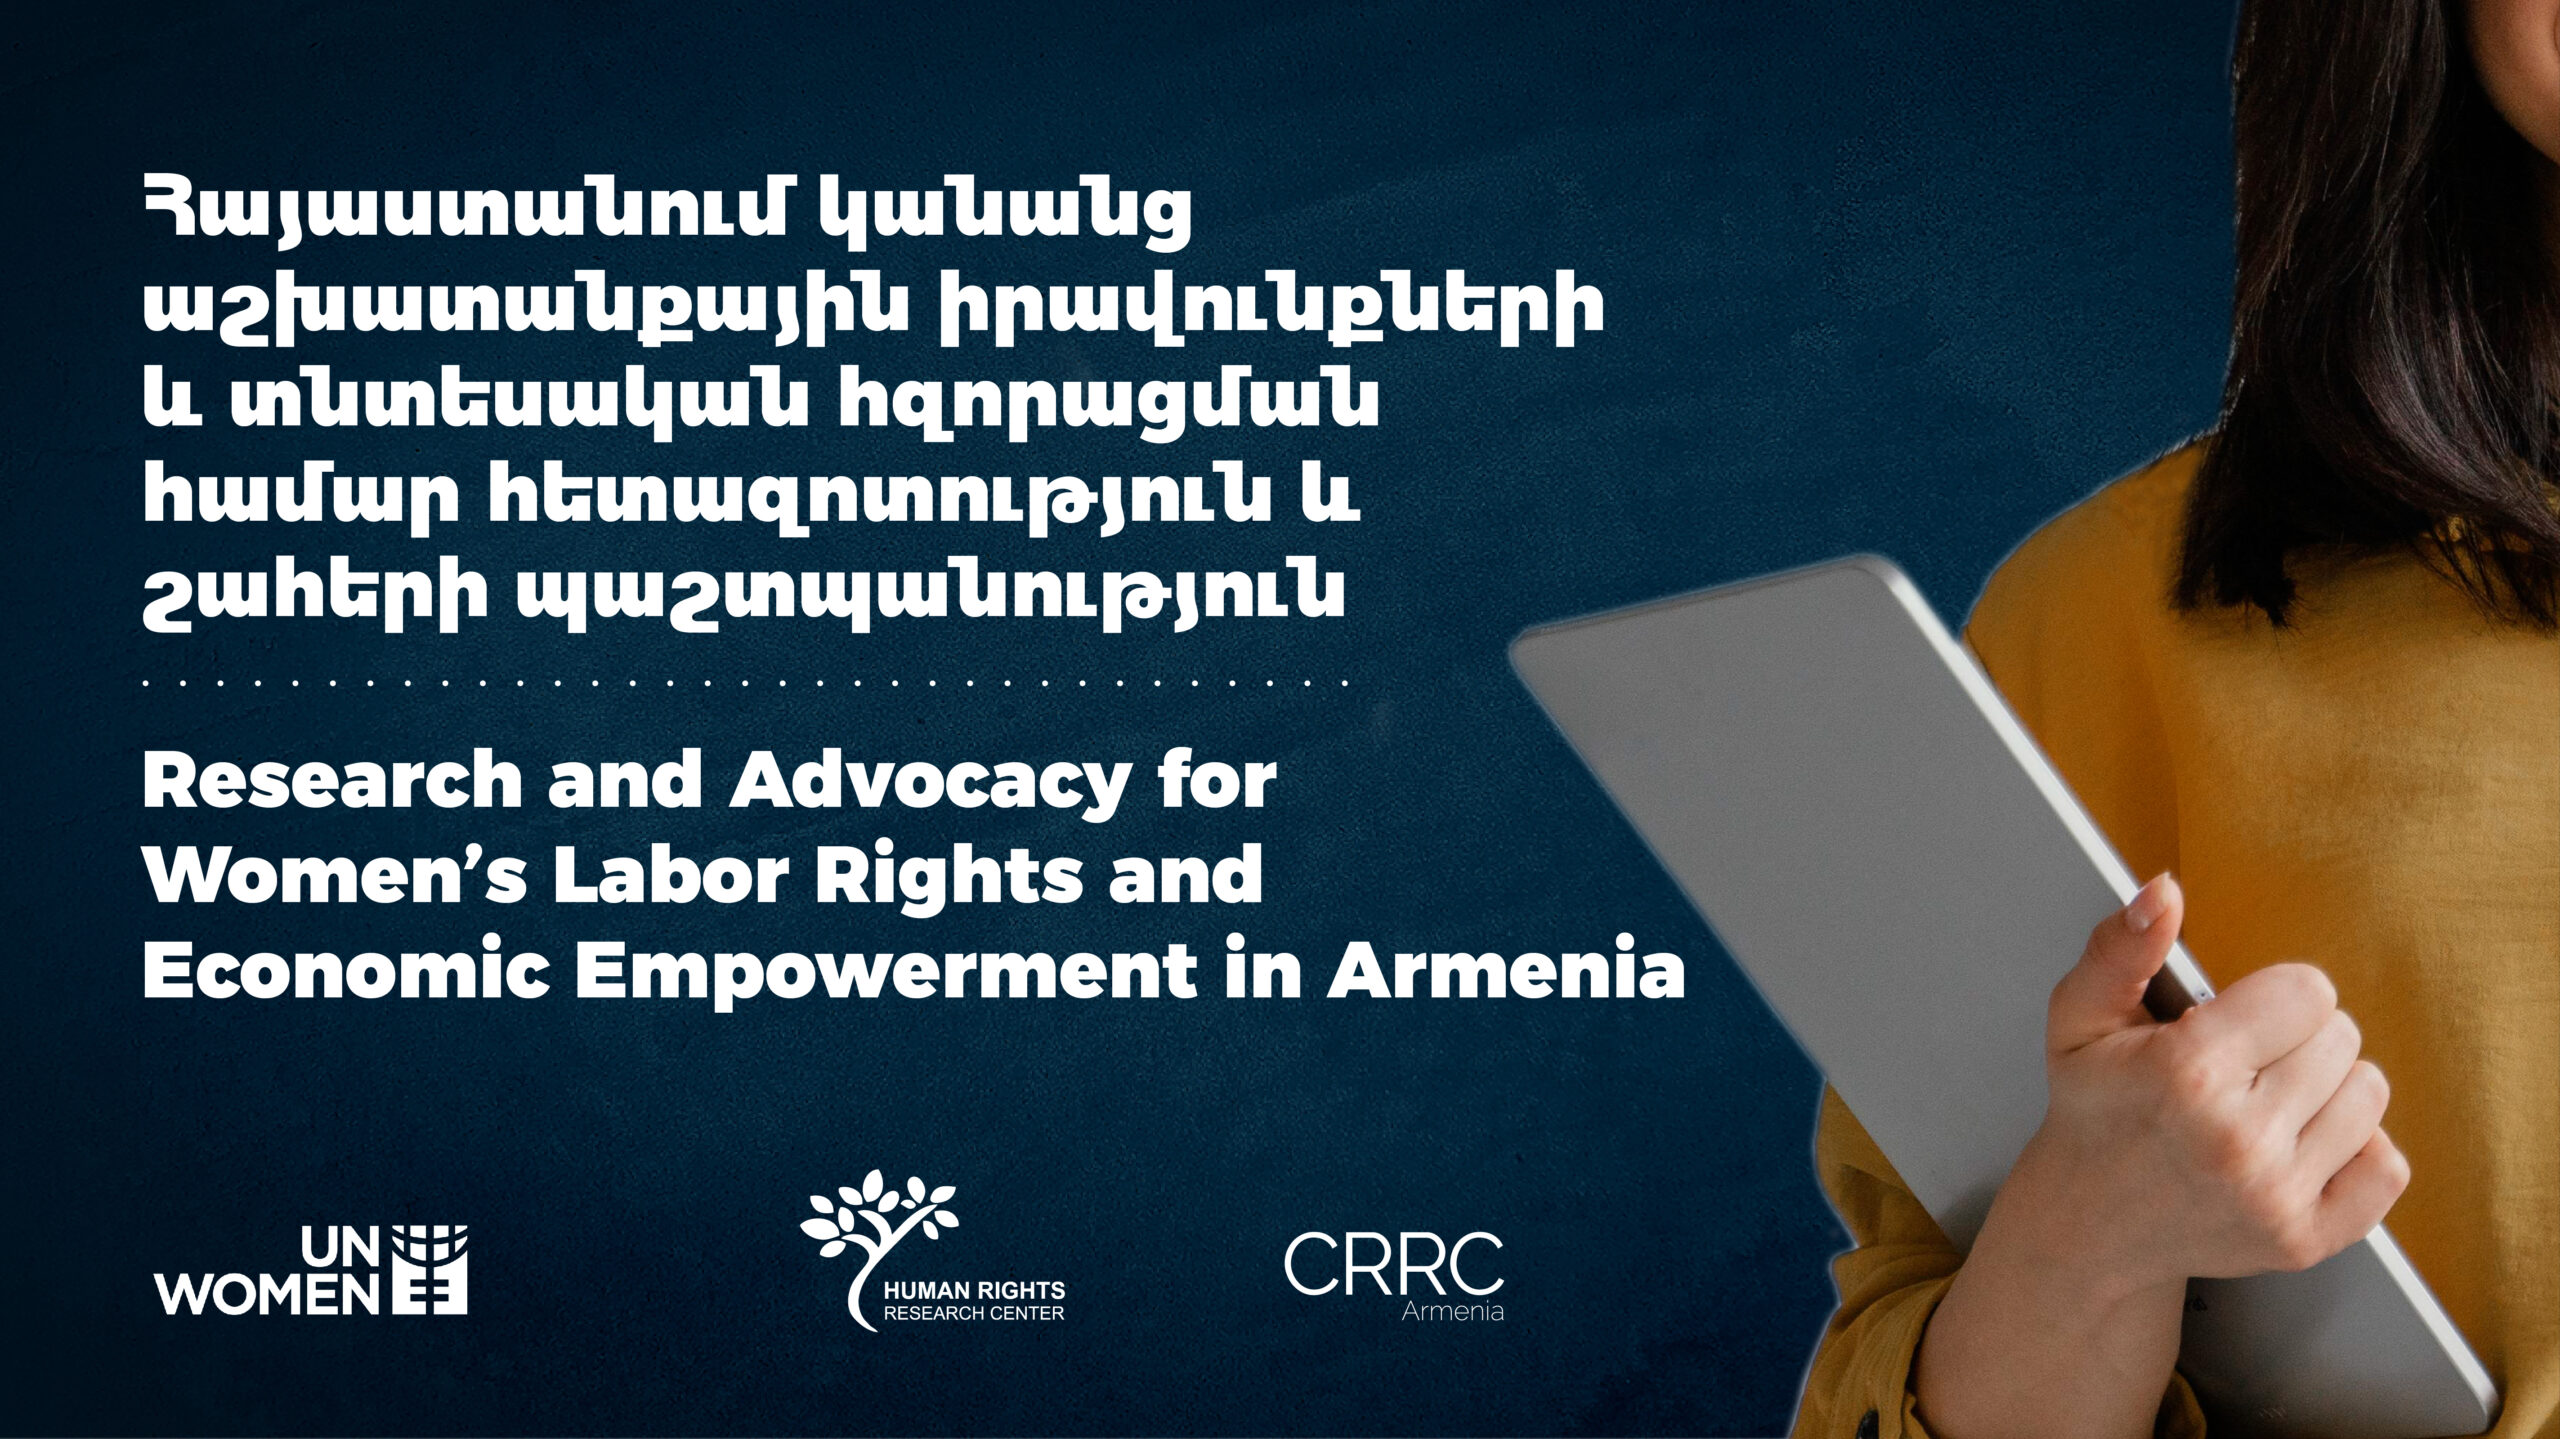 Research and Advocacy for Women’s Labor Rights and Economic Empowerment in Armenia